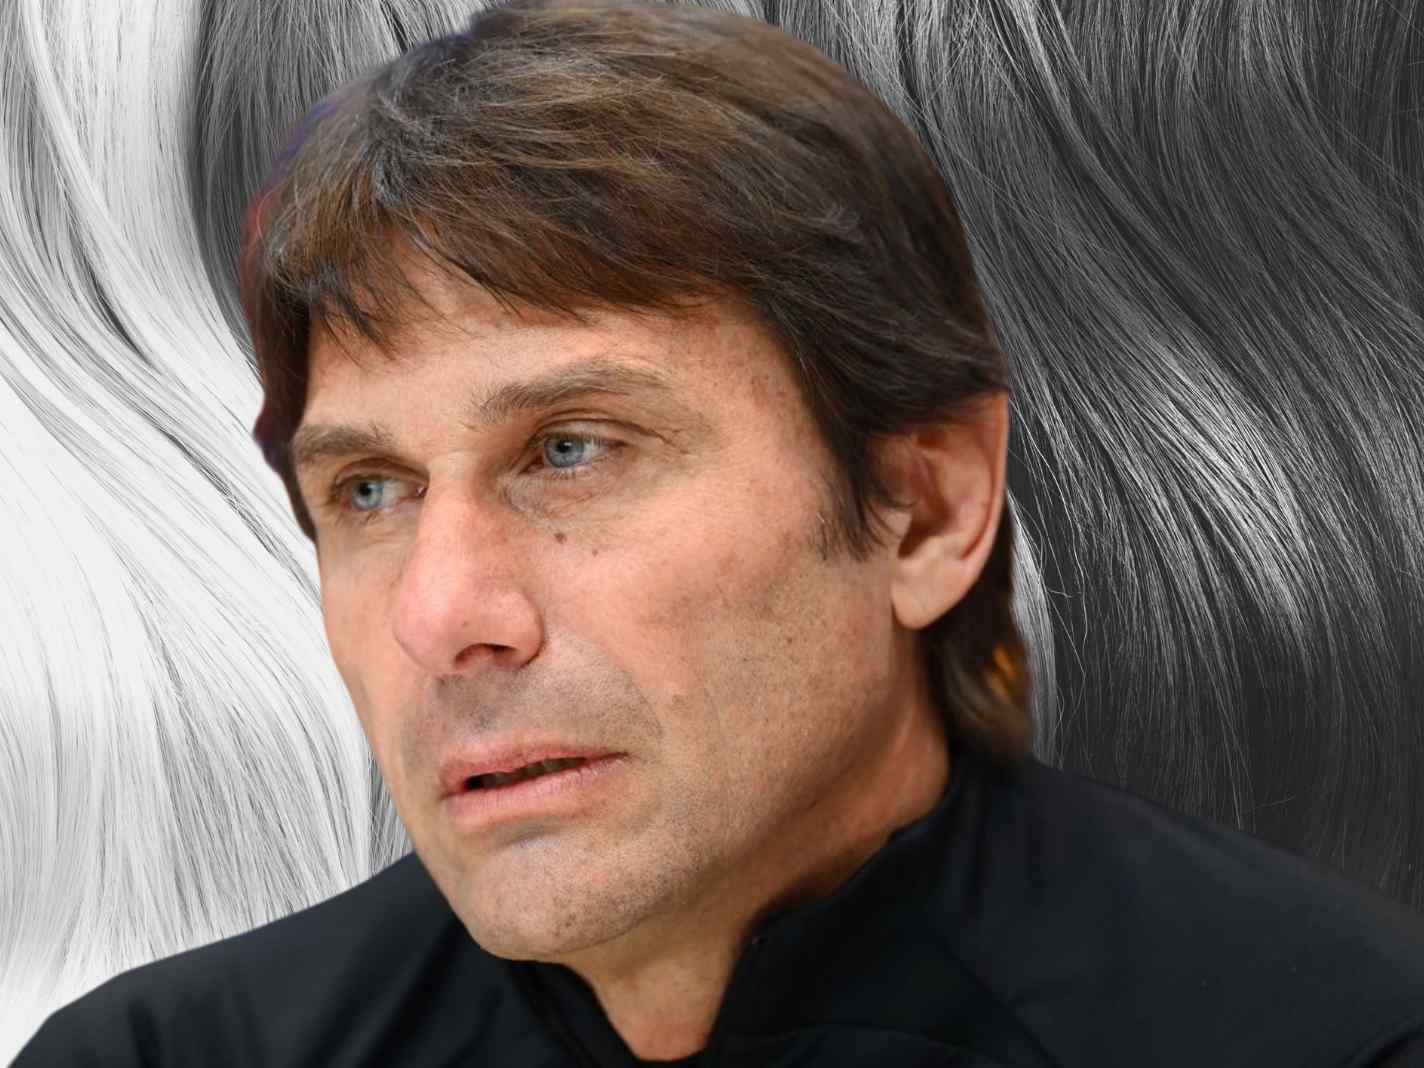 Did Antonio Conte Get A Hair Transplant? A Timeline Of His Hair Transformation